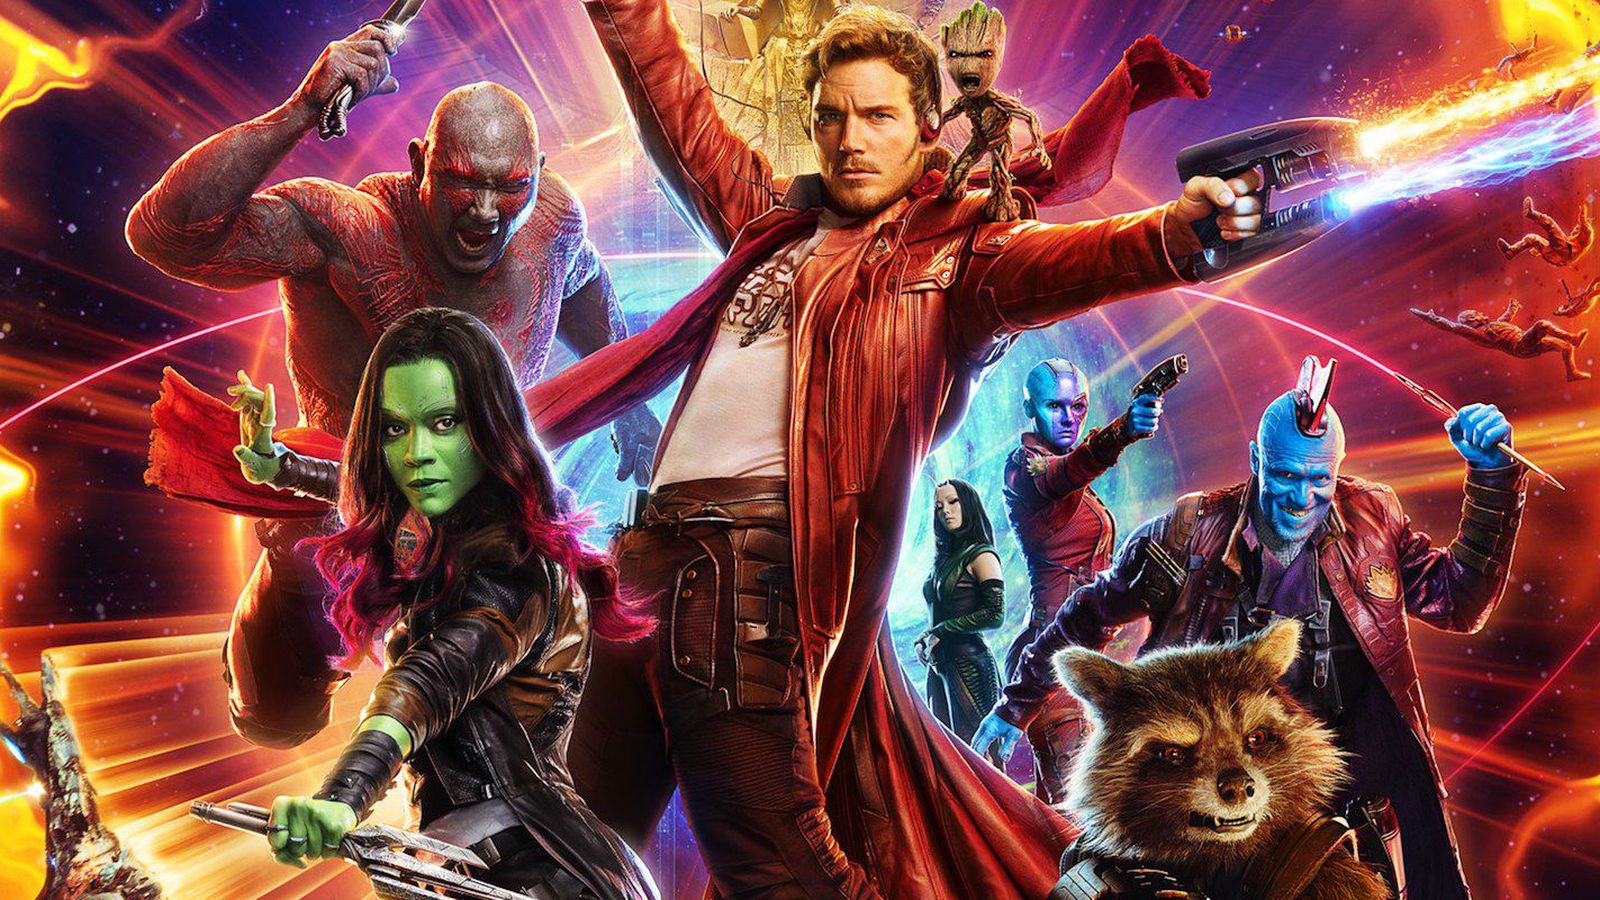 Which Original Avenger Are You? Guardians of the Galaxy Vol. 2